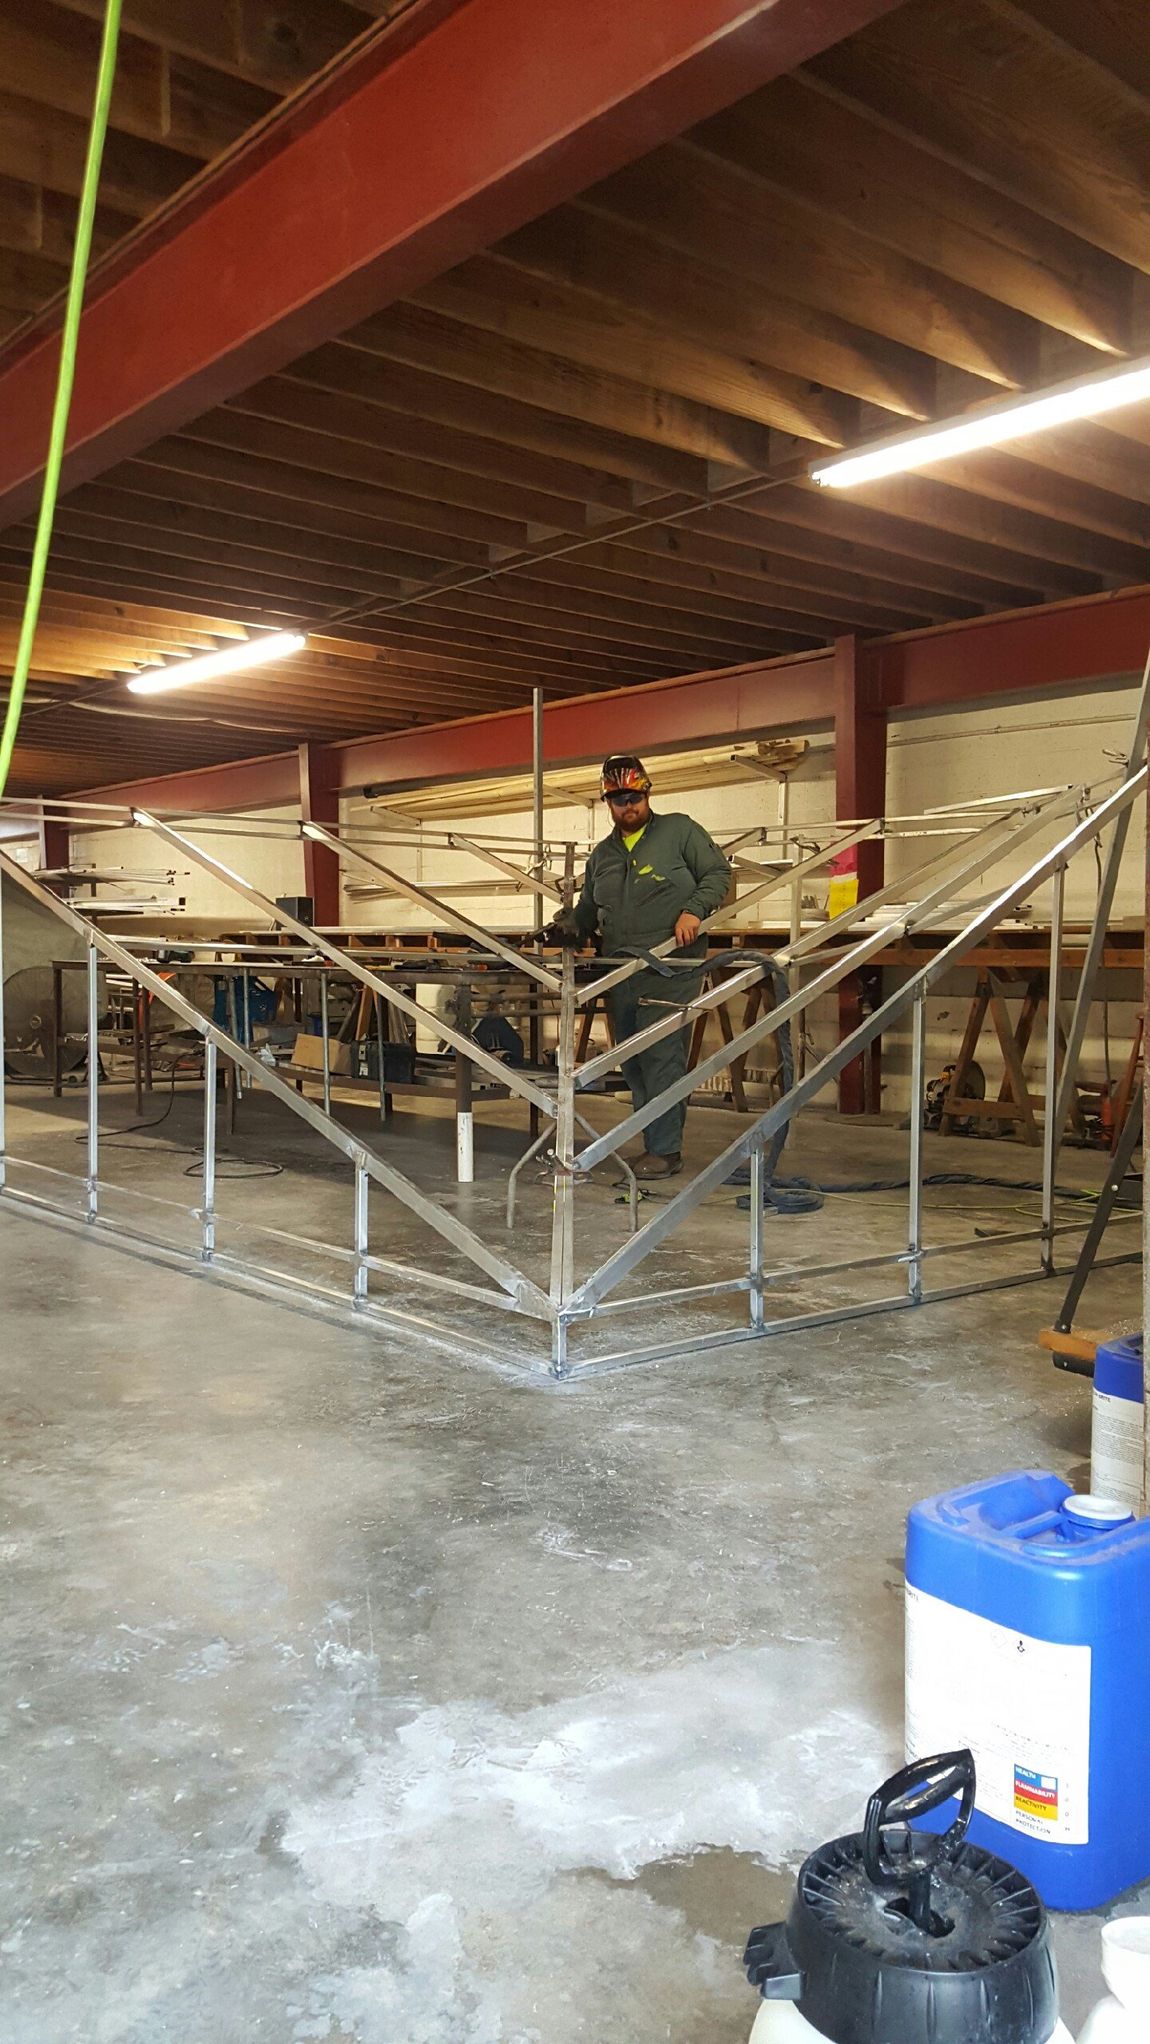 Under Construction — Canopy Being Built By A Worker in Chalmette, LA